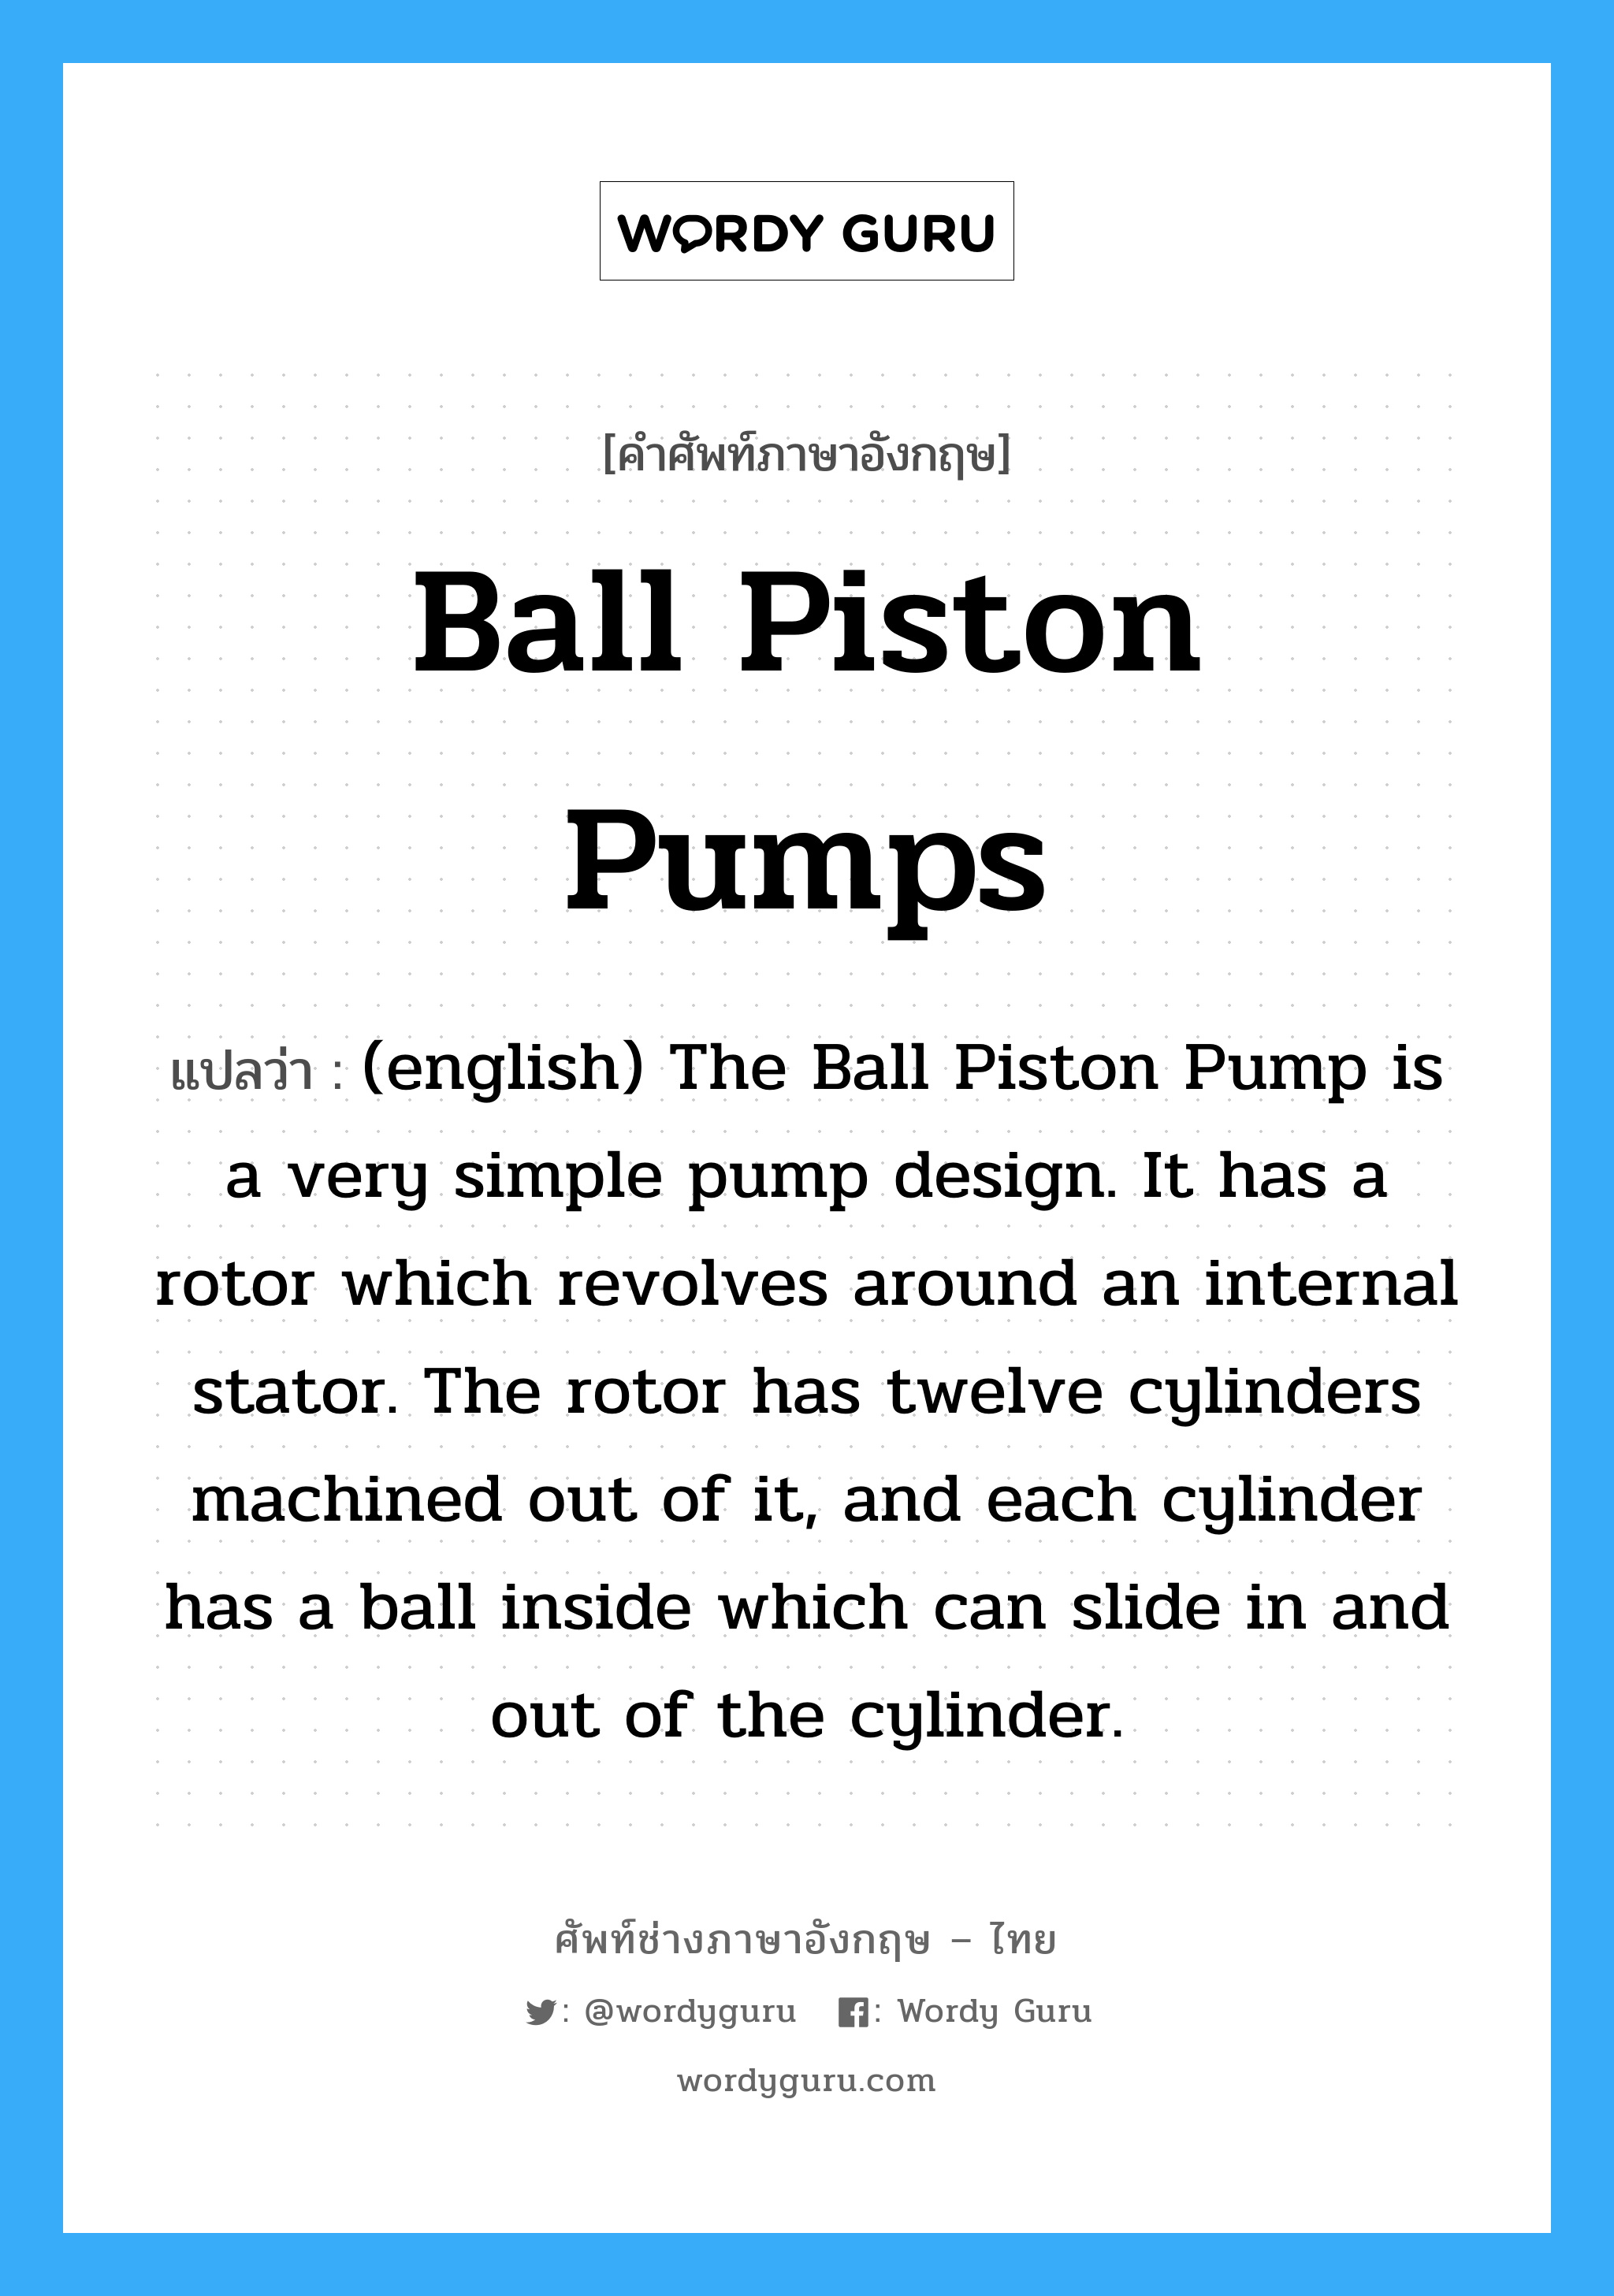 (english) The Ball Piston Pump is a very simple pump design. It has a rotor which revolves around an internal stator. The rotor has twelve cylinders machined out of it, and each cylinder has a ball inside which can slide in and out of the cylinder. ภาษาอังกฤษ?, คำศัพท์ช่างภาษาอังกฤษ - ไทย (english) The Ball Piston Pump is a very simple pump design. It has a rotor which revolves around an internal stator. The rotor has twelve cylinders machined out of it, and each cylinder has a ball inside which can slide in and out of the cylinder. คำศัพท์ภาษาอังกฤษ (english) The Ball Piston Pump is a very simple pump design. It has a rotor which revolves around an internal stator. The rotor has twelve cylinders machined out of it, and each cylinder has a ball inside which can slide in and out of the cylinder. แปลว่า Ball Piston Pumps